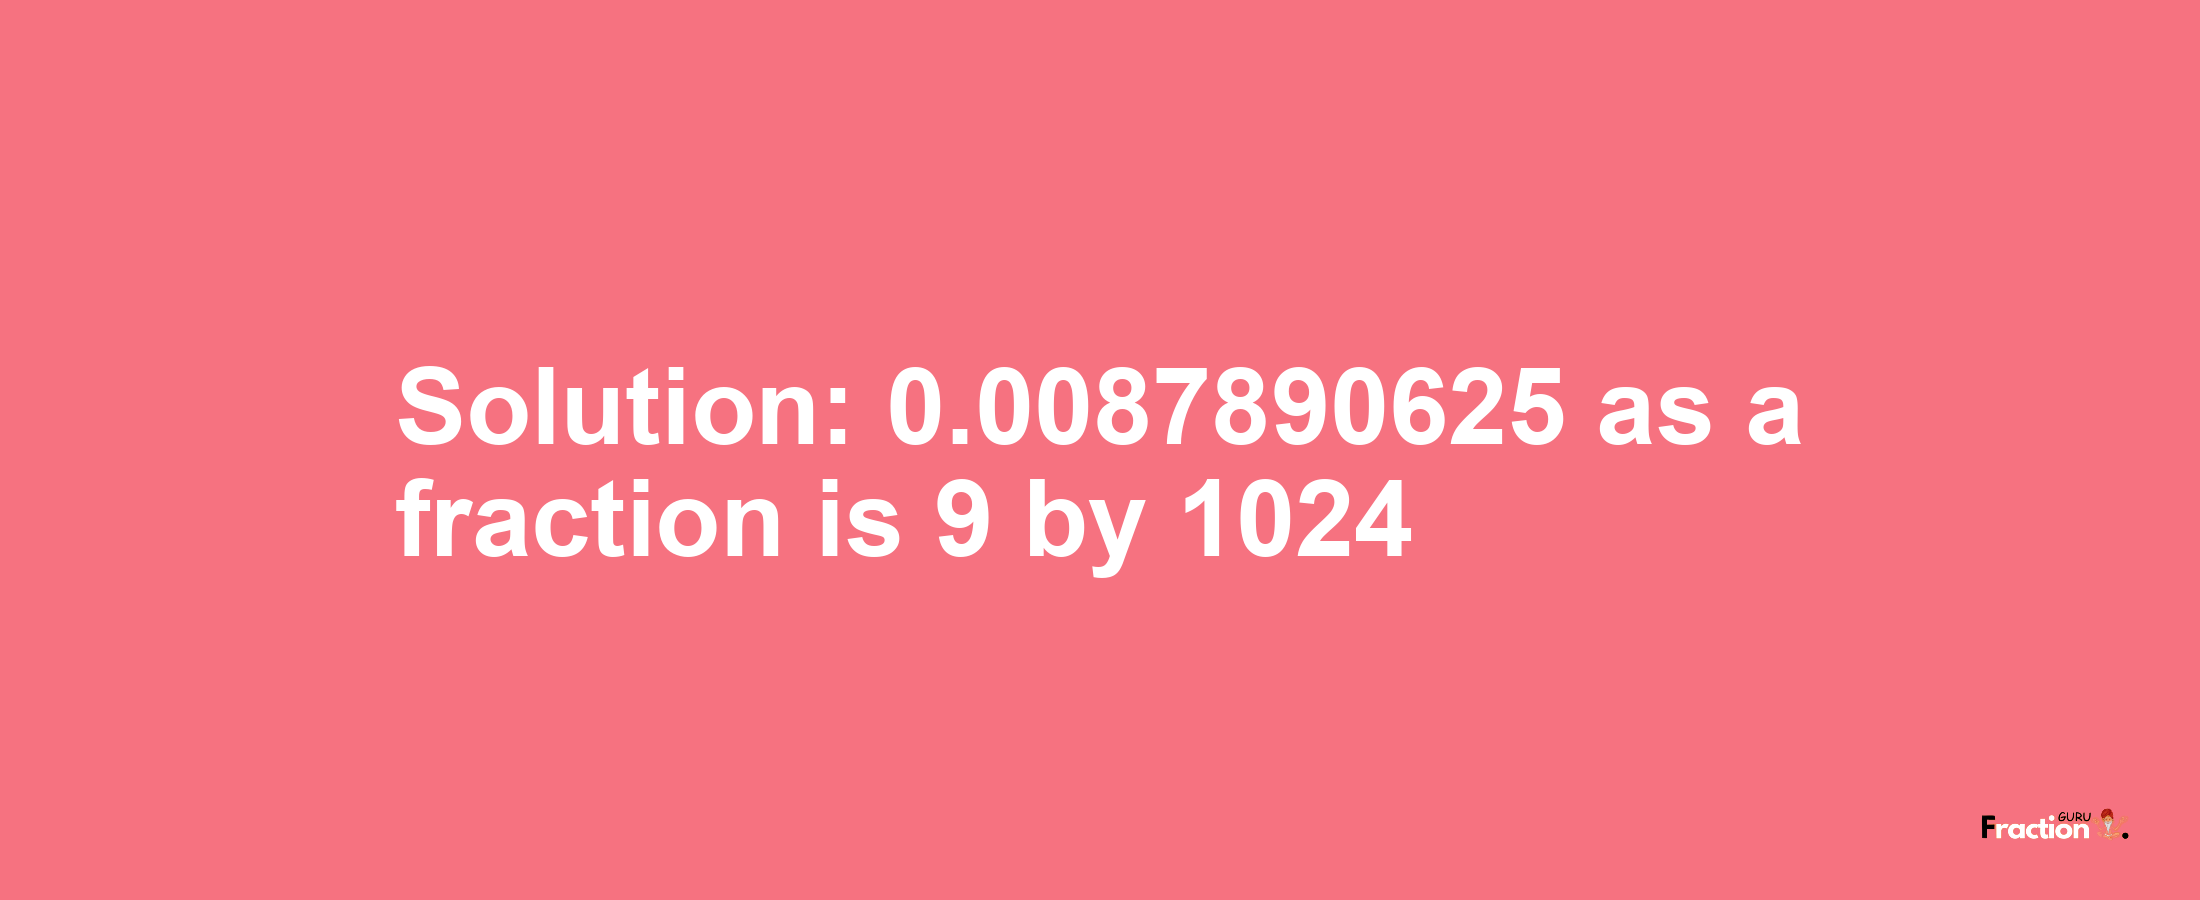 Solution:0.0087890625 as a fraction is 9/1024